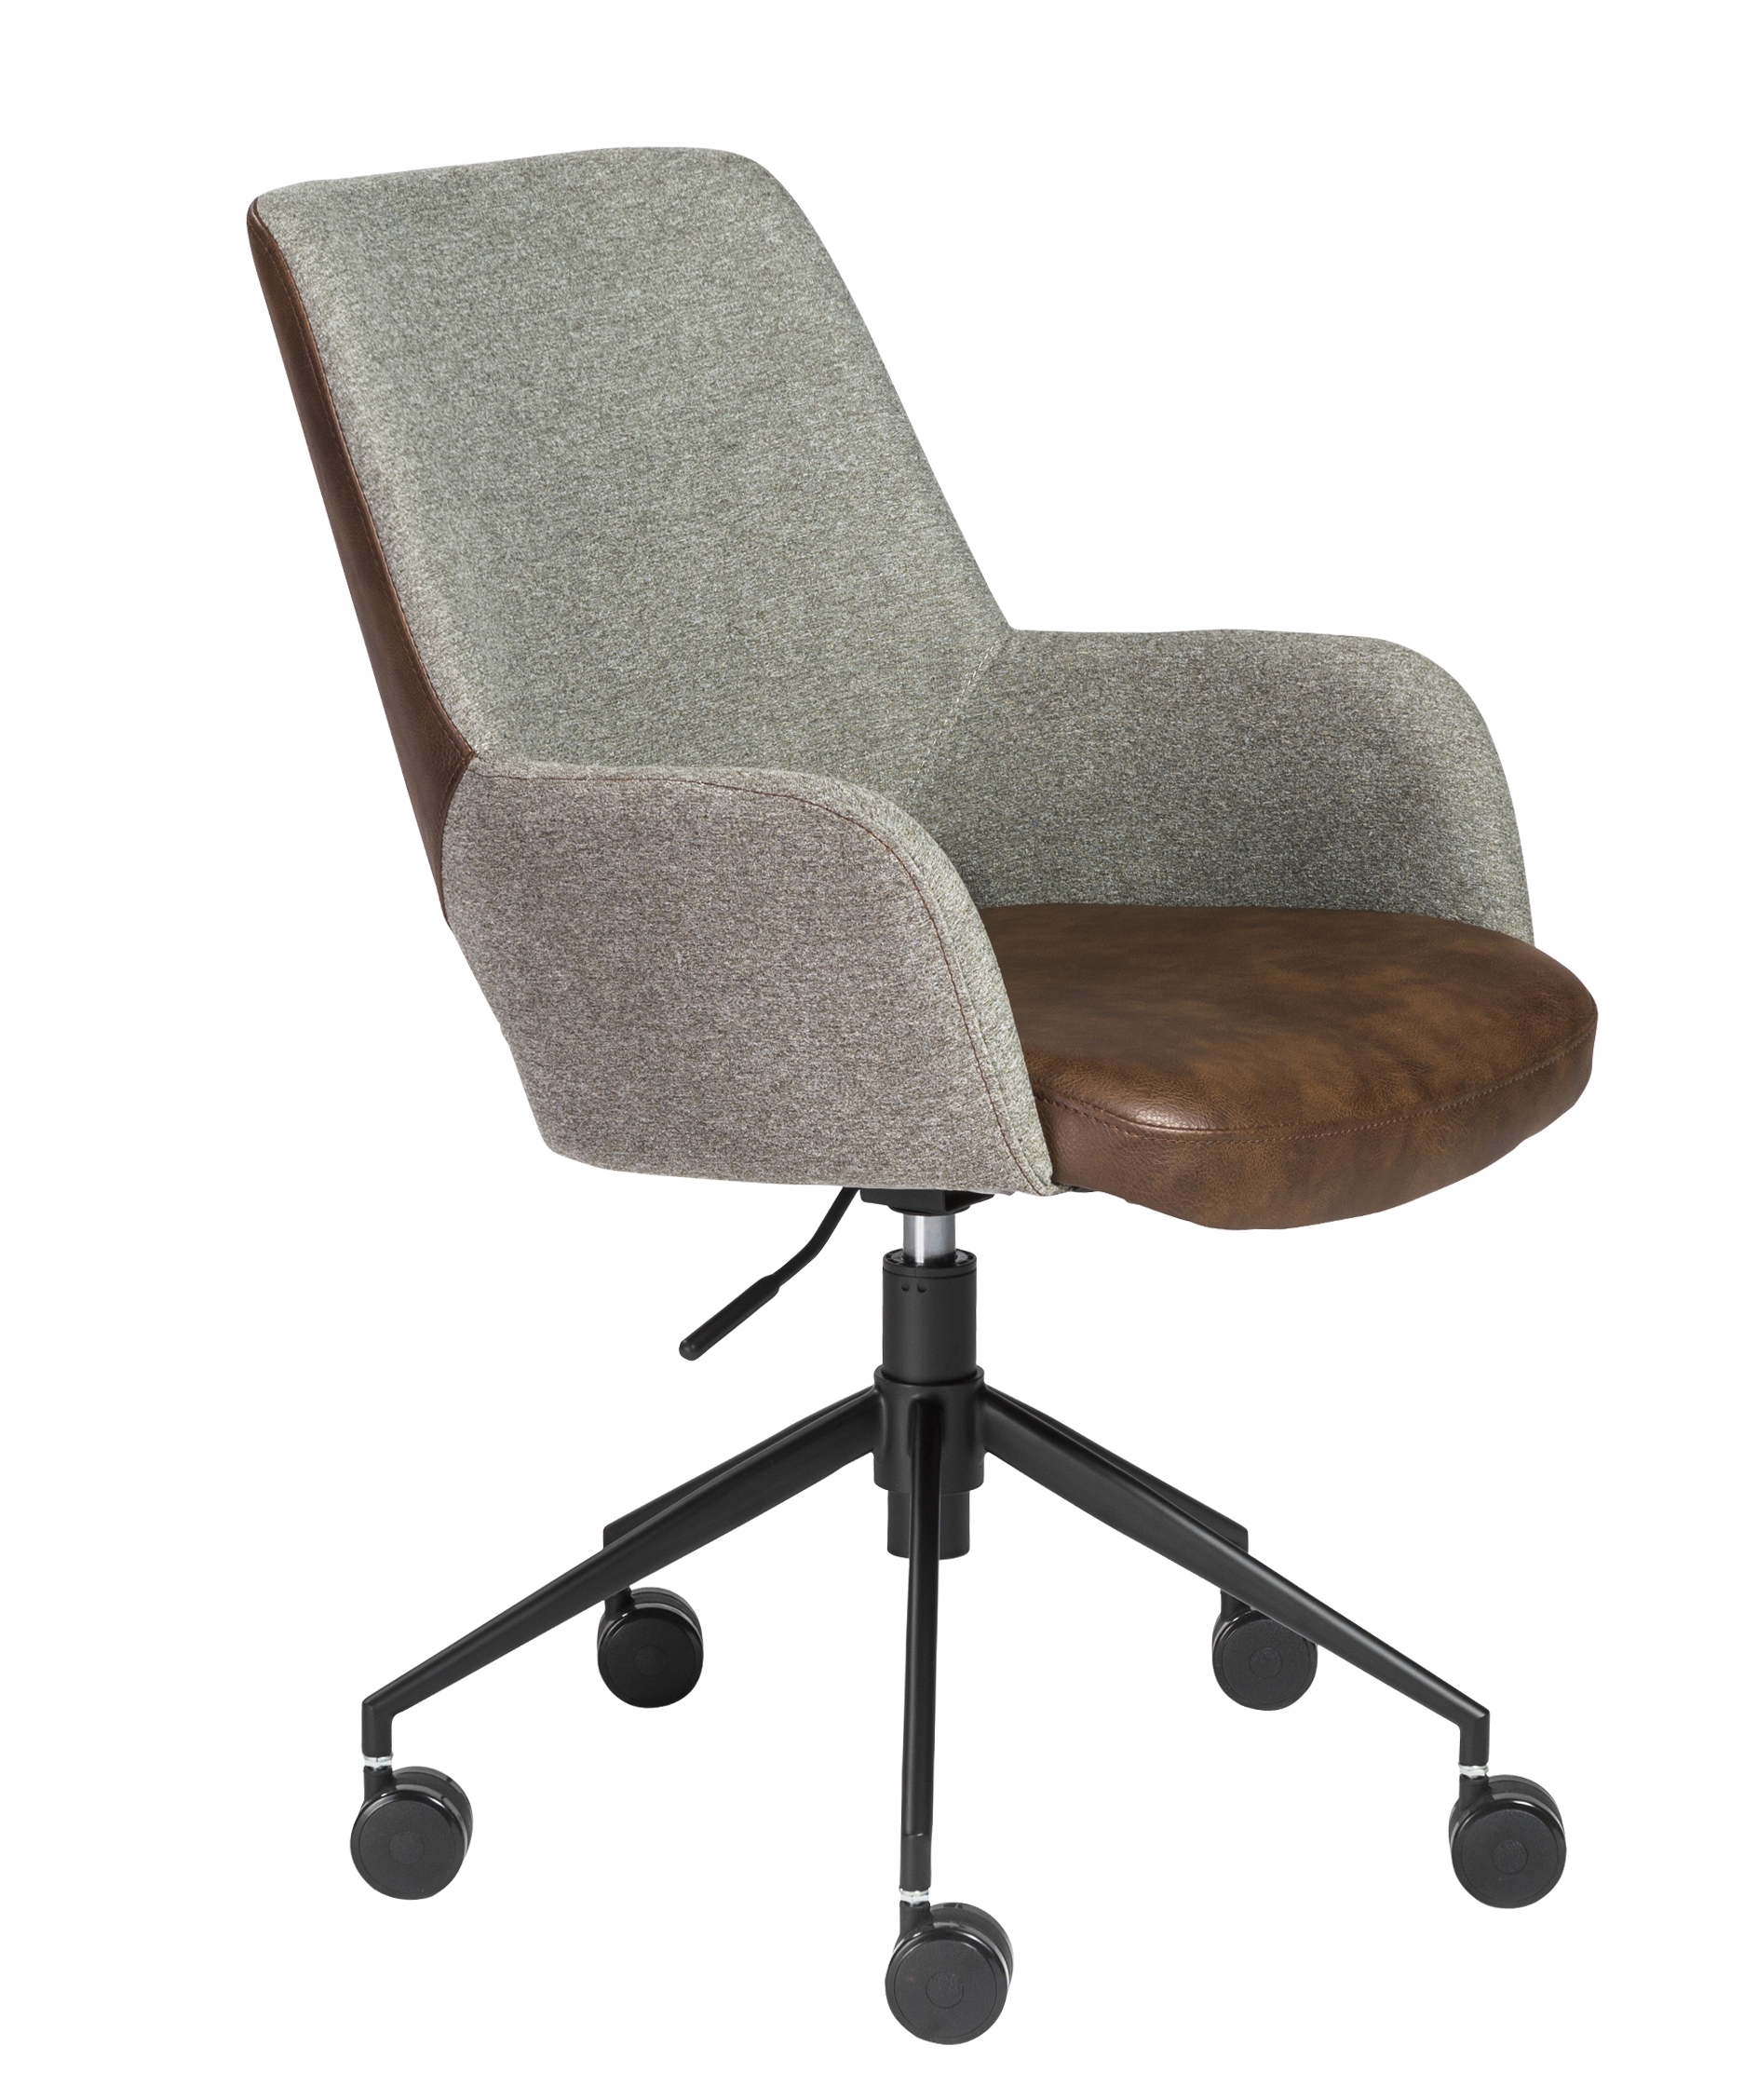 Randy Office Chair, Gray and Brown - Image 1